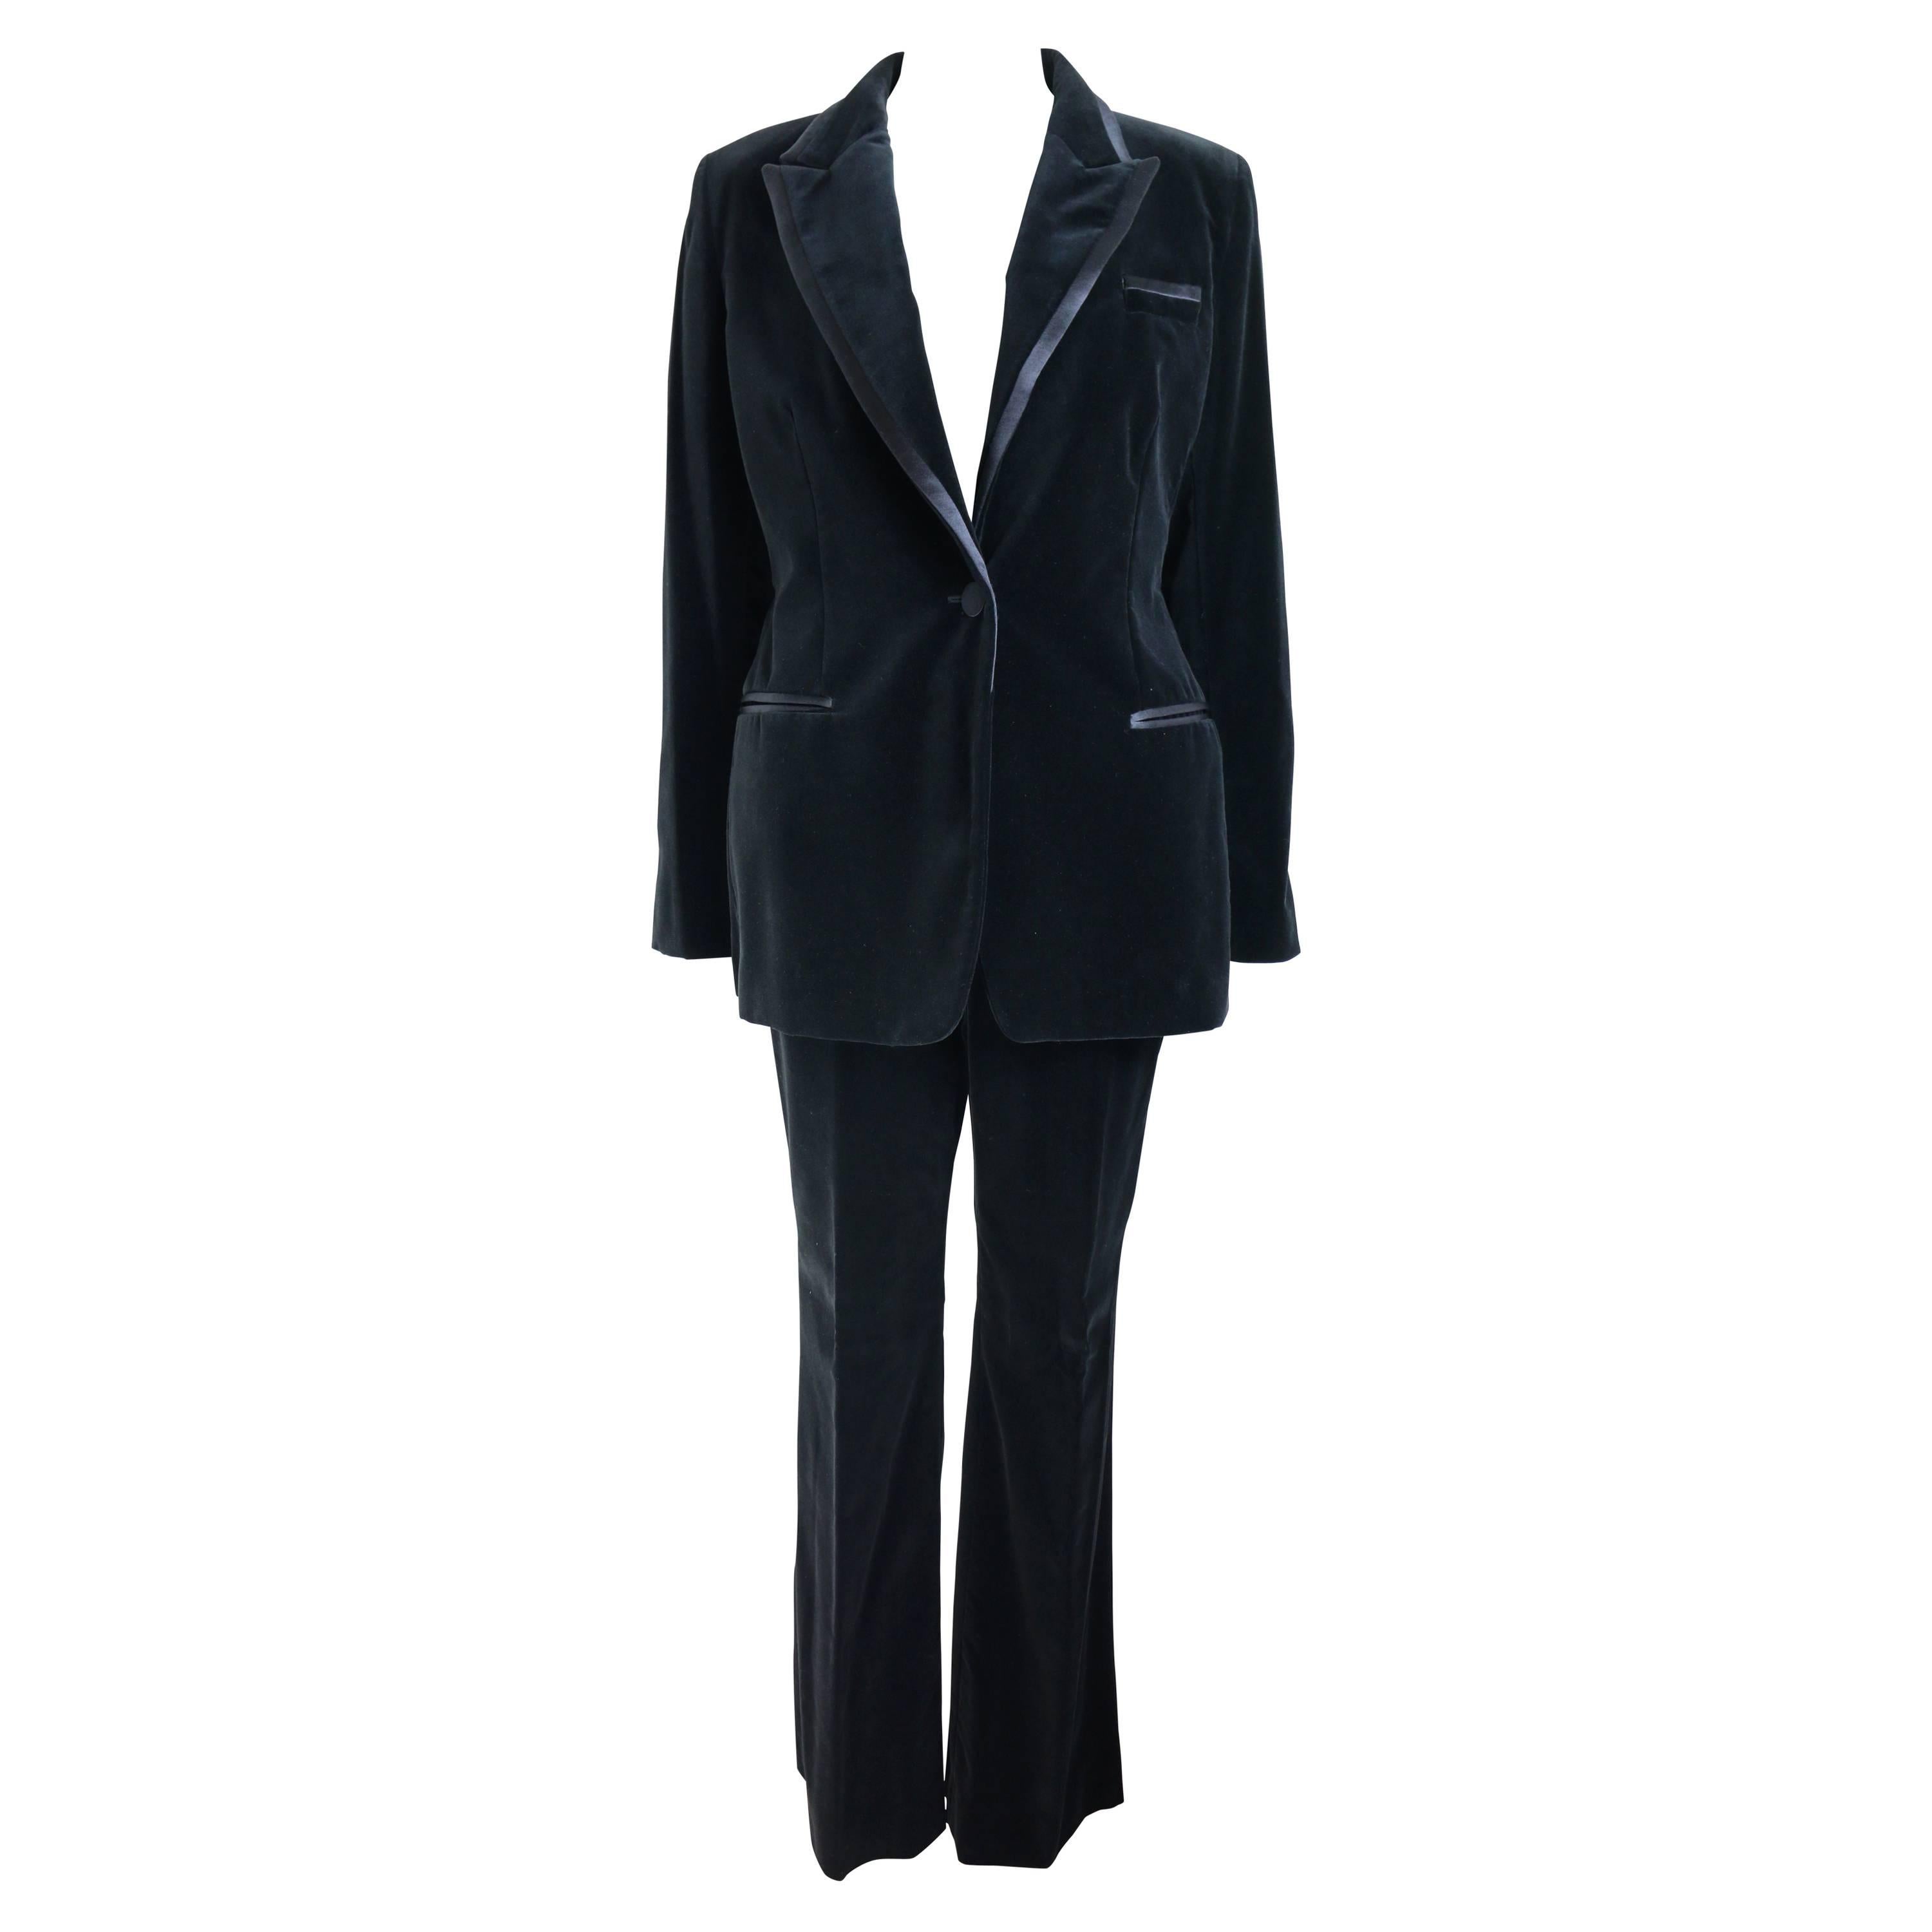 Iconic Gucci By Tom Ford Black Velvet Tuxedo Suit ( Unworn) For Sale